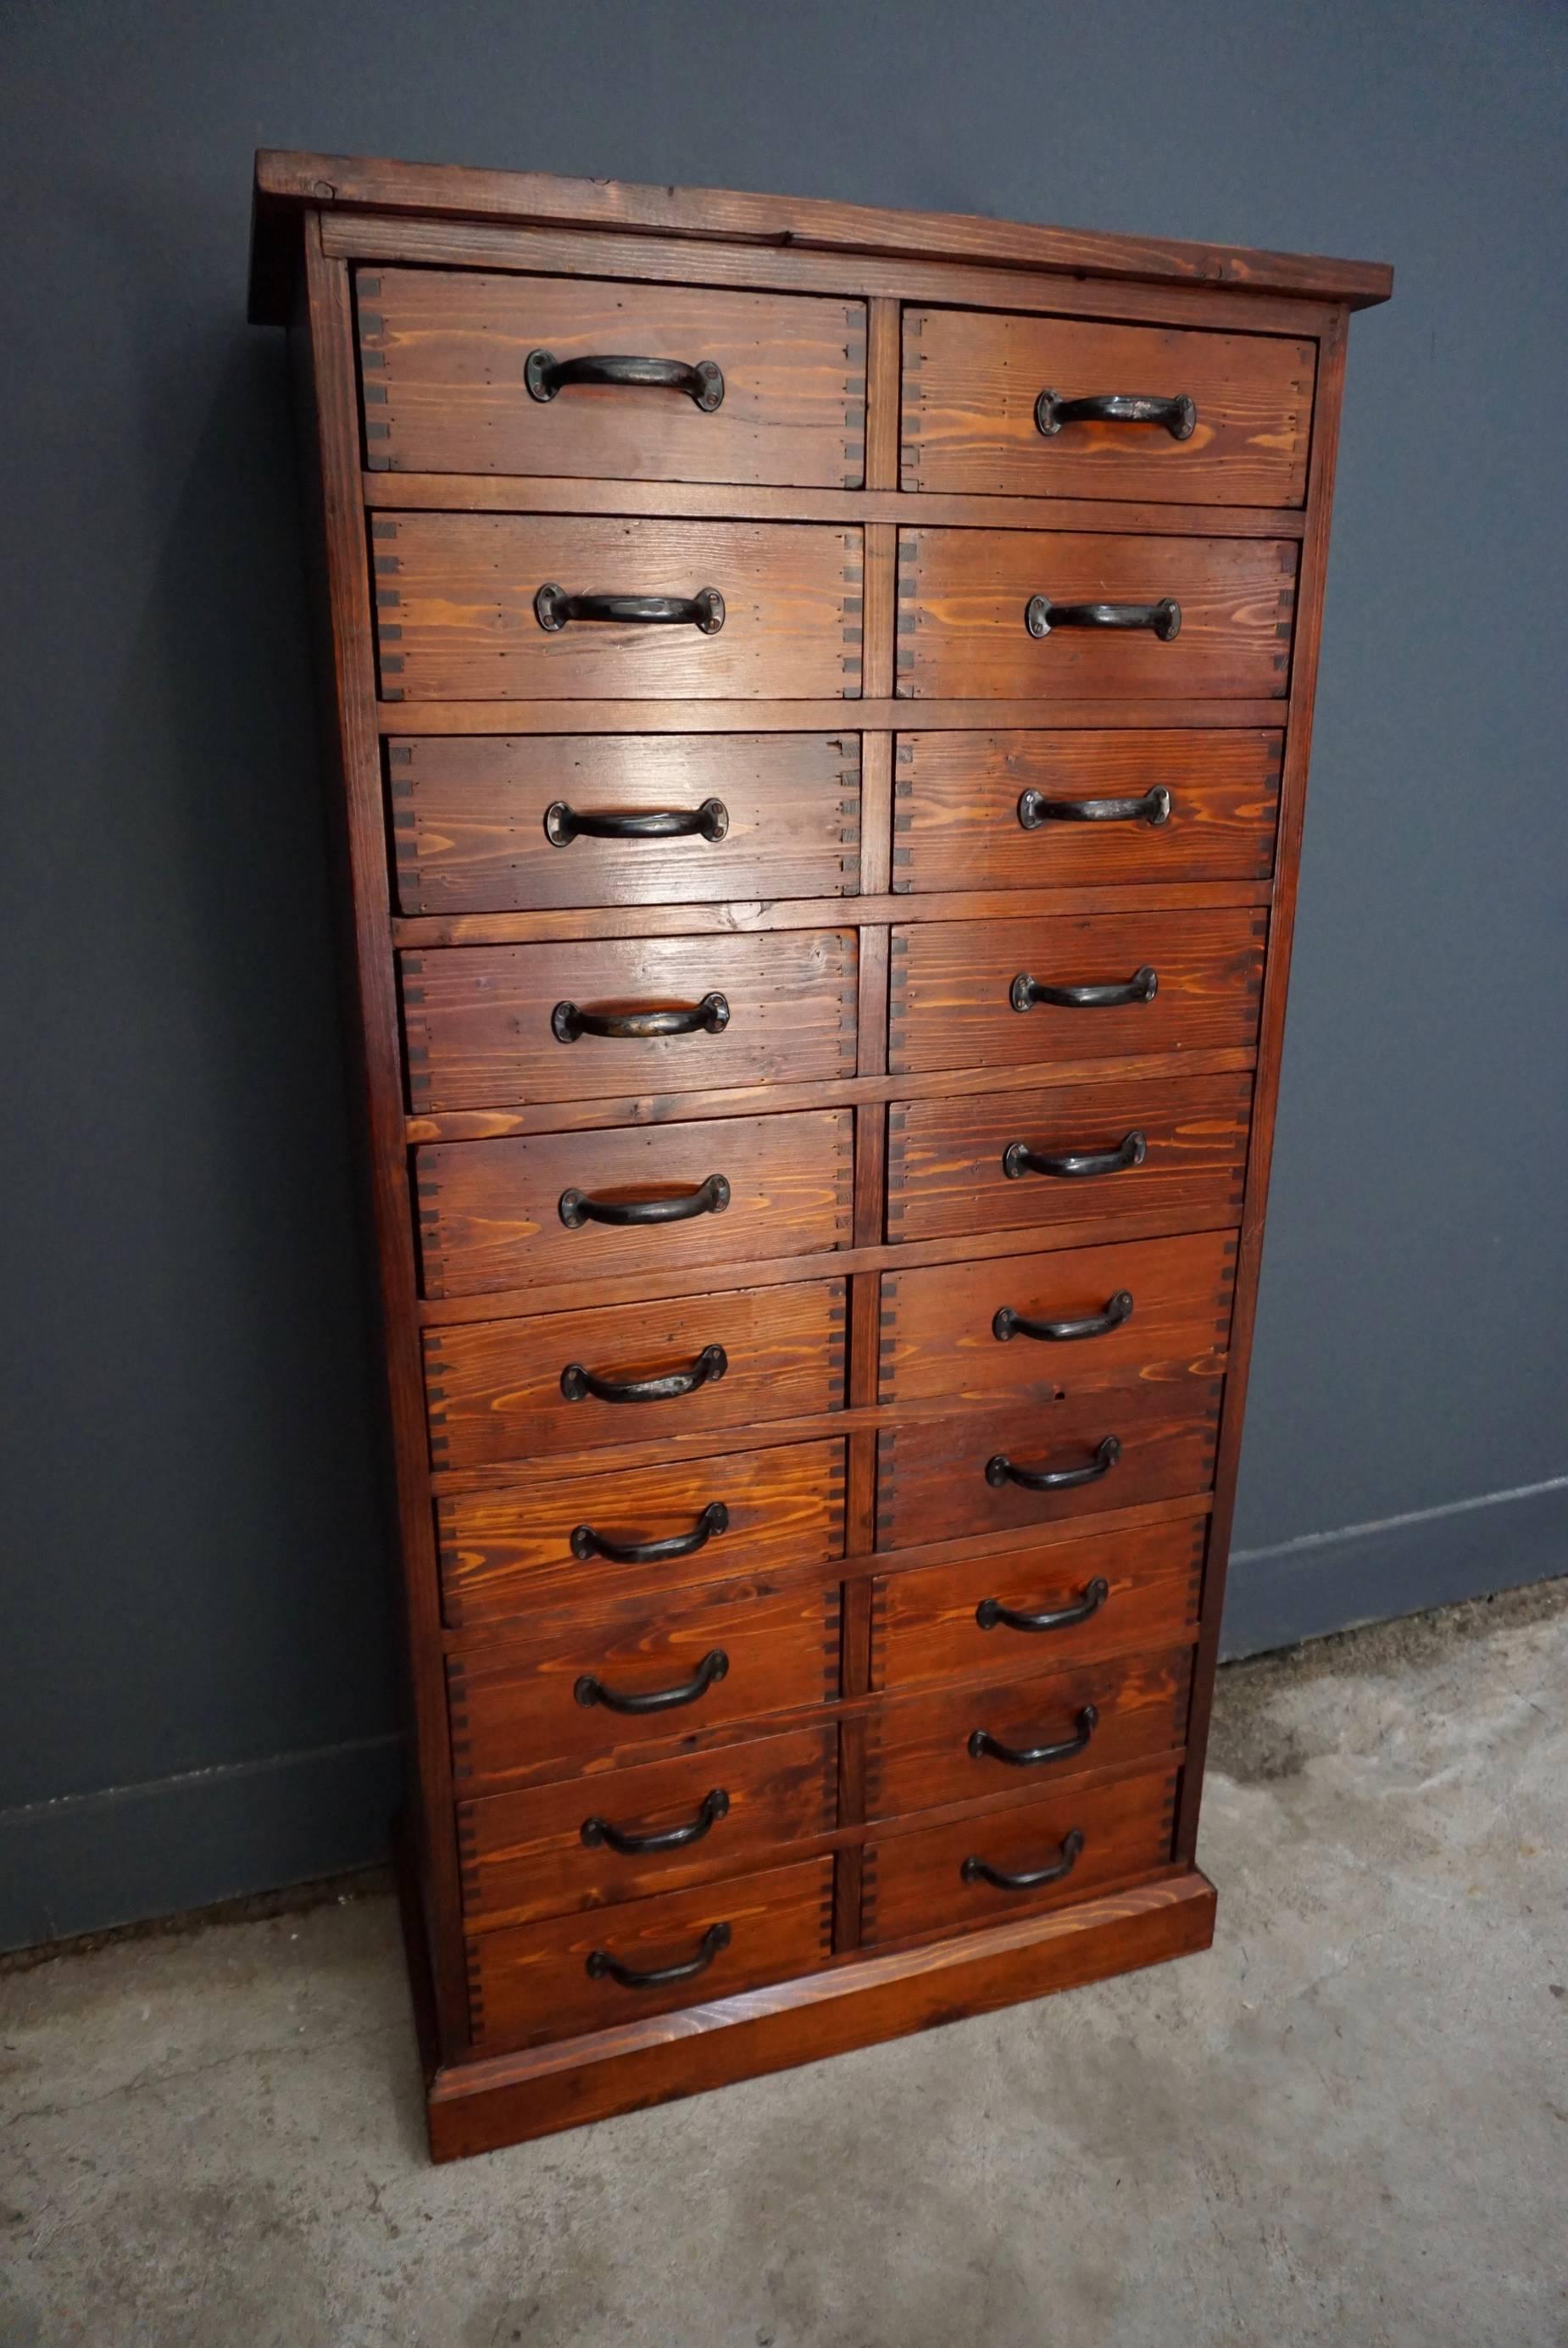 This pine apothecary cabinet was designed and made, circa 1950 in The Netherlands. It features drawers with metal hardware. The inside of the drawers measure: 30 x 29.5 x 9.5 cm.